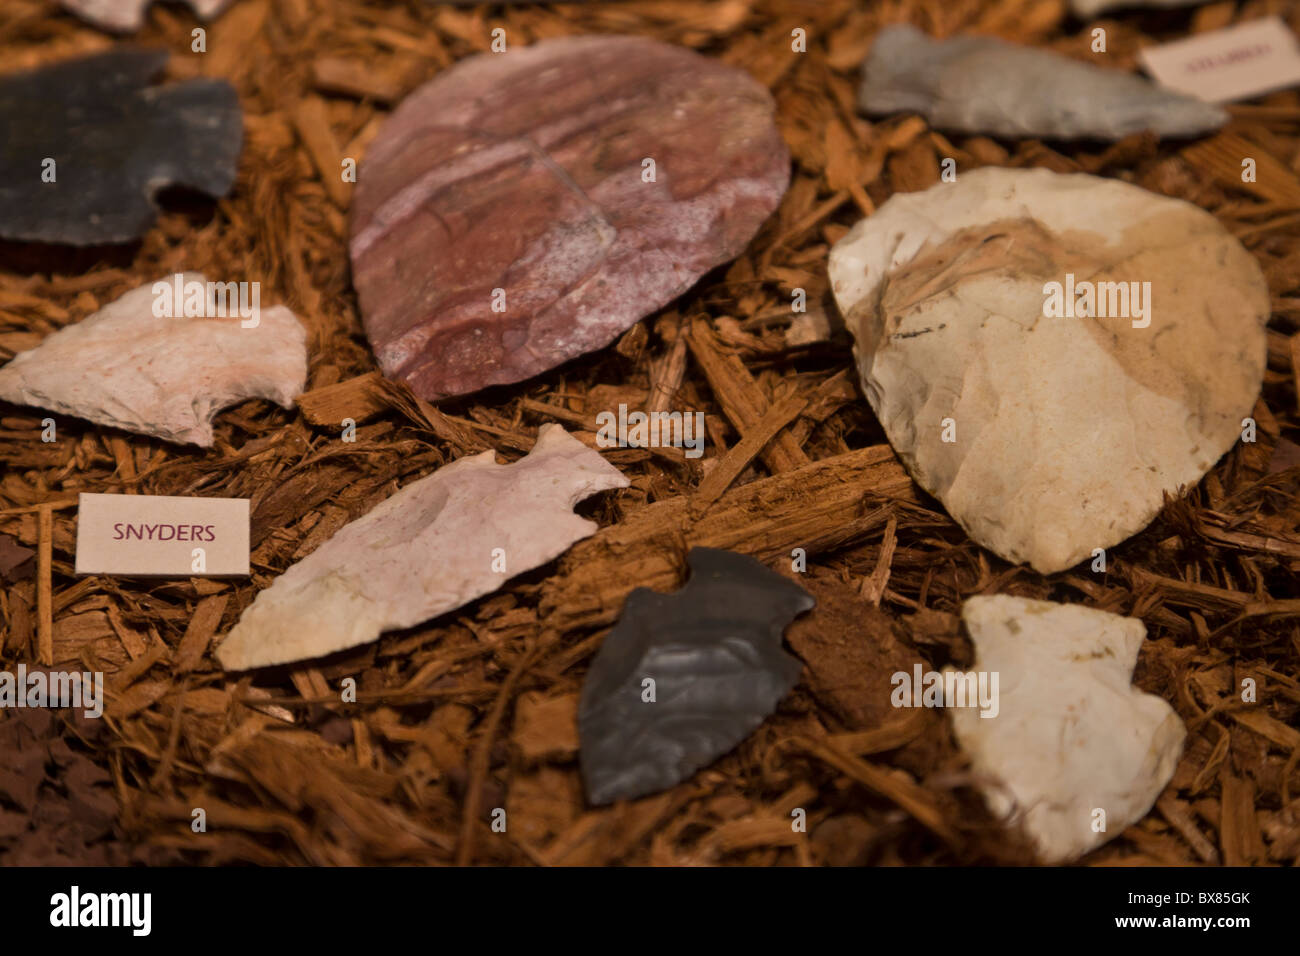 Snyders notched points or arrowheads left by the Mississippian culture at Cahokia Mounds State Historic Site, Illinois, USA. Stock Photo